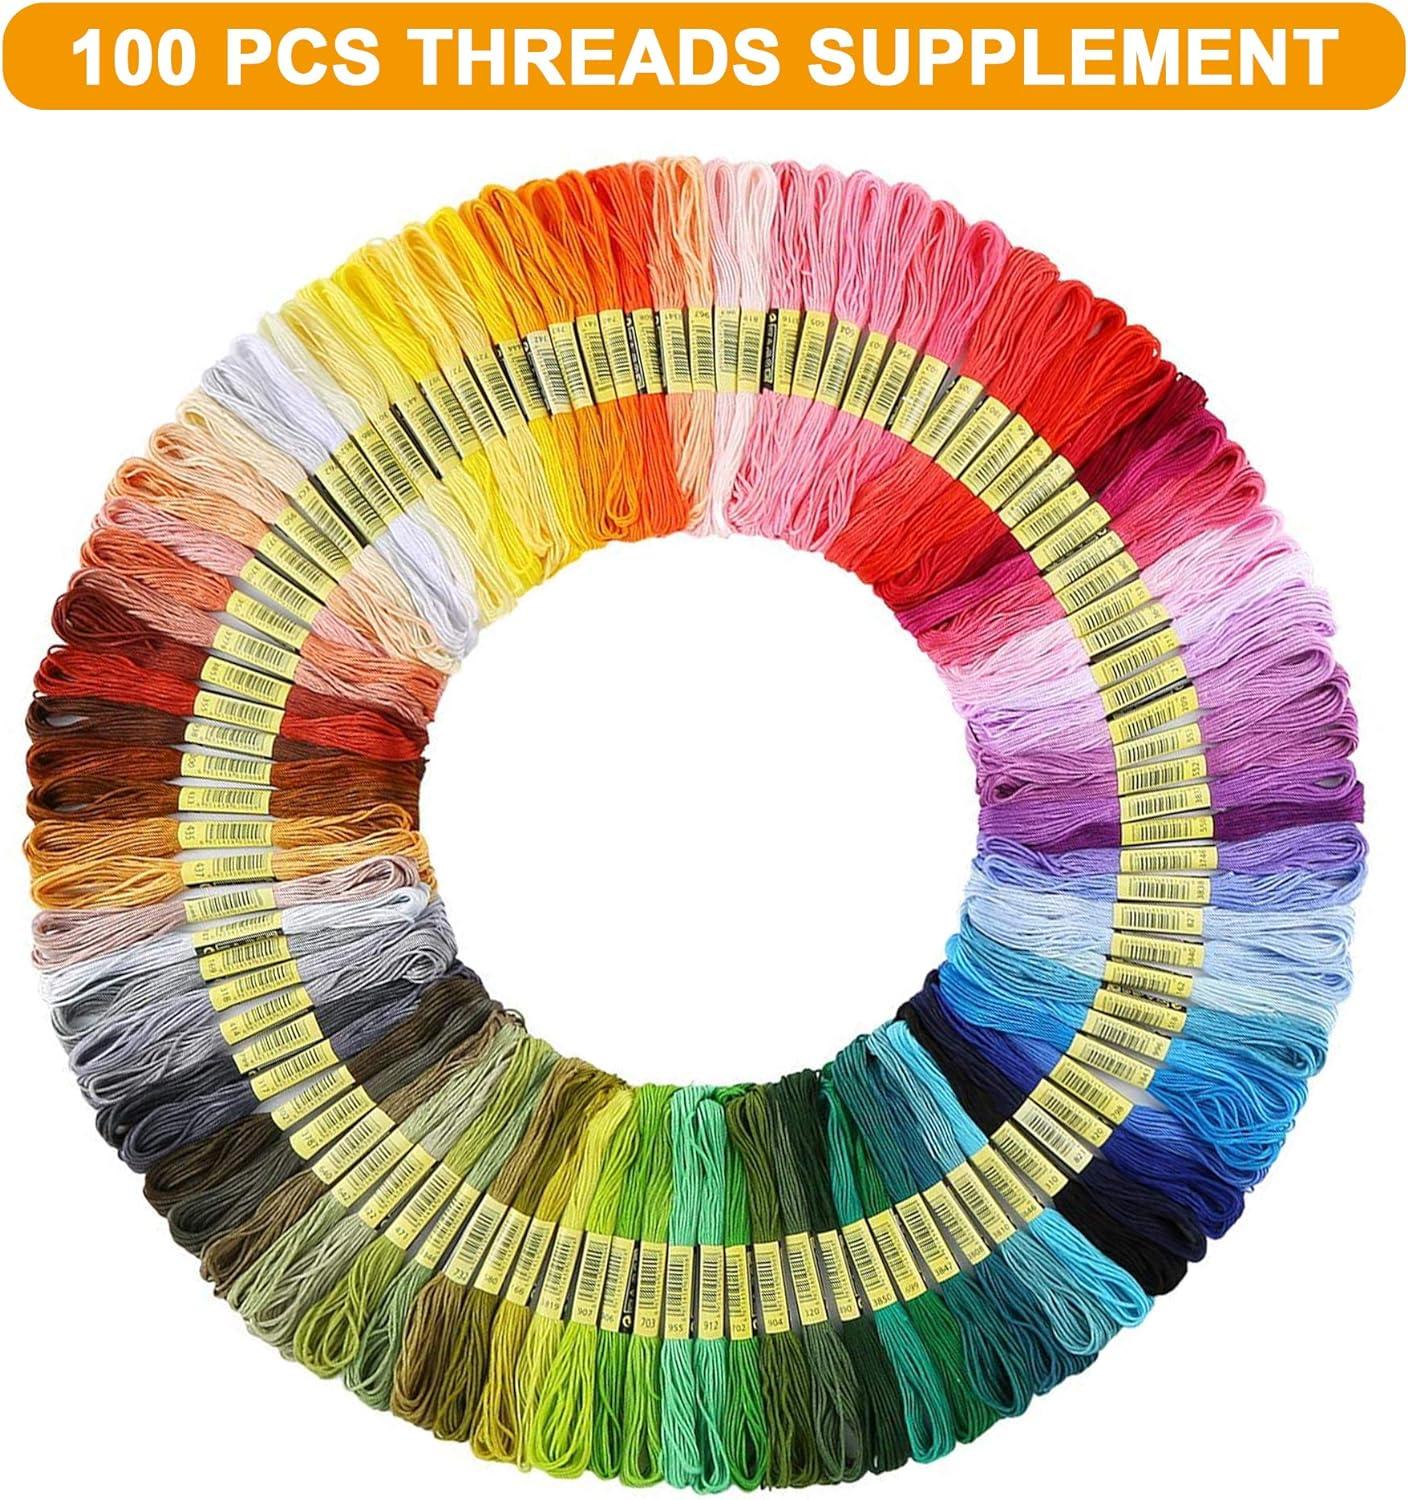 INSCRAFT Embroidery Floss Kit, 364 Pack Embroidery Cross Stitch Kit with  200 Colors Friendship Bracelets Floss and Cross Stitch Tools for Embroidery